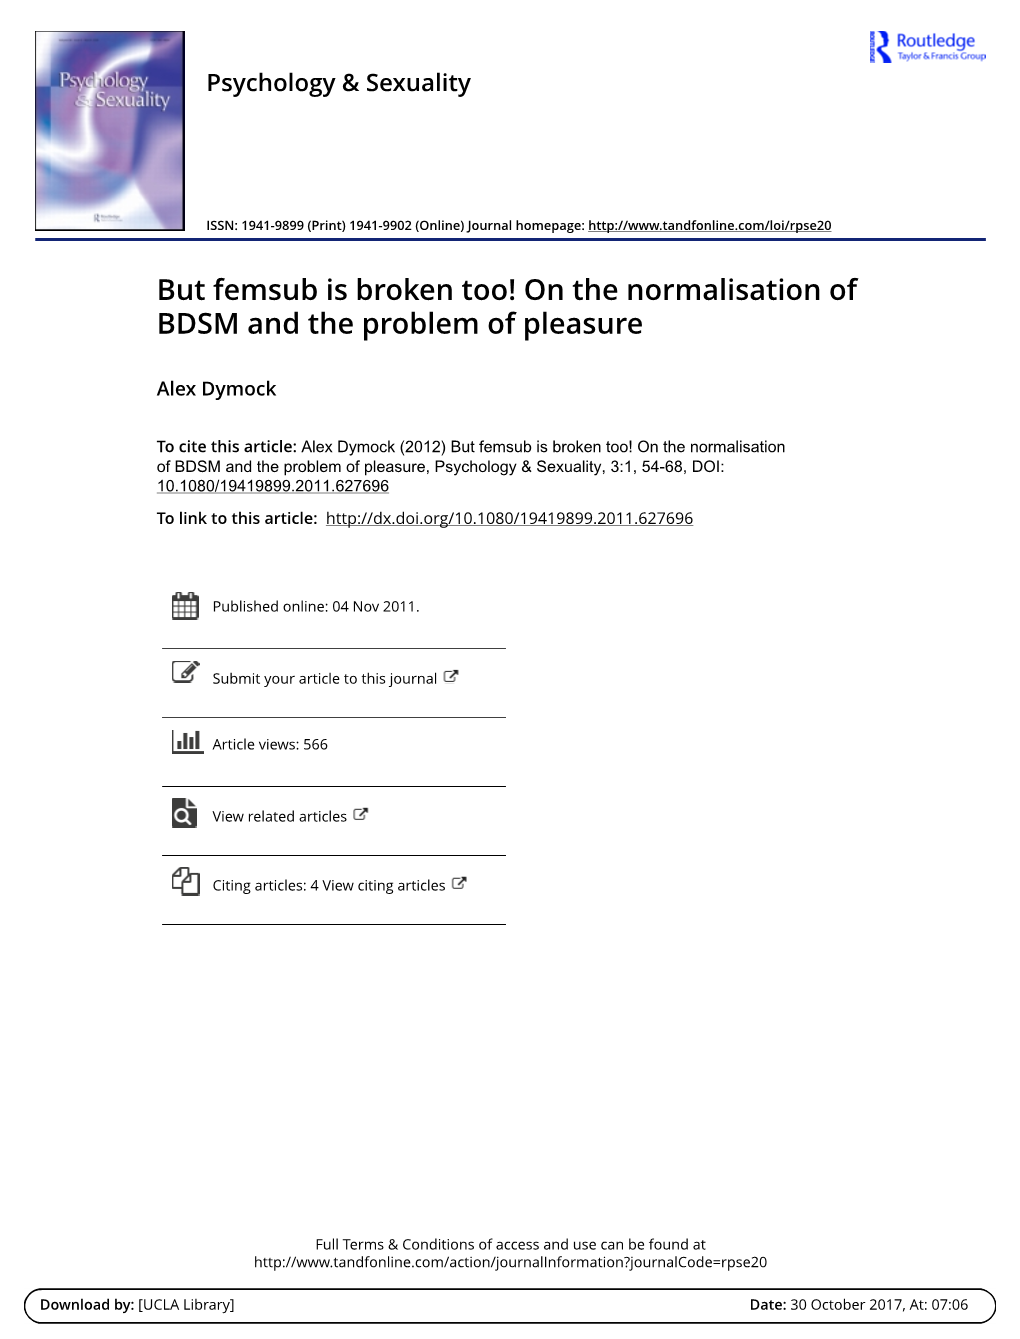 But Femsub Is Broken Too! on the Normalisation of BDSM and the Problem of Pleasure